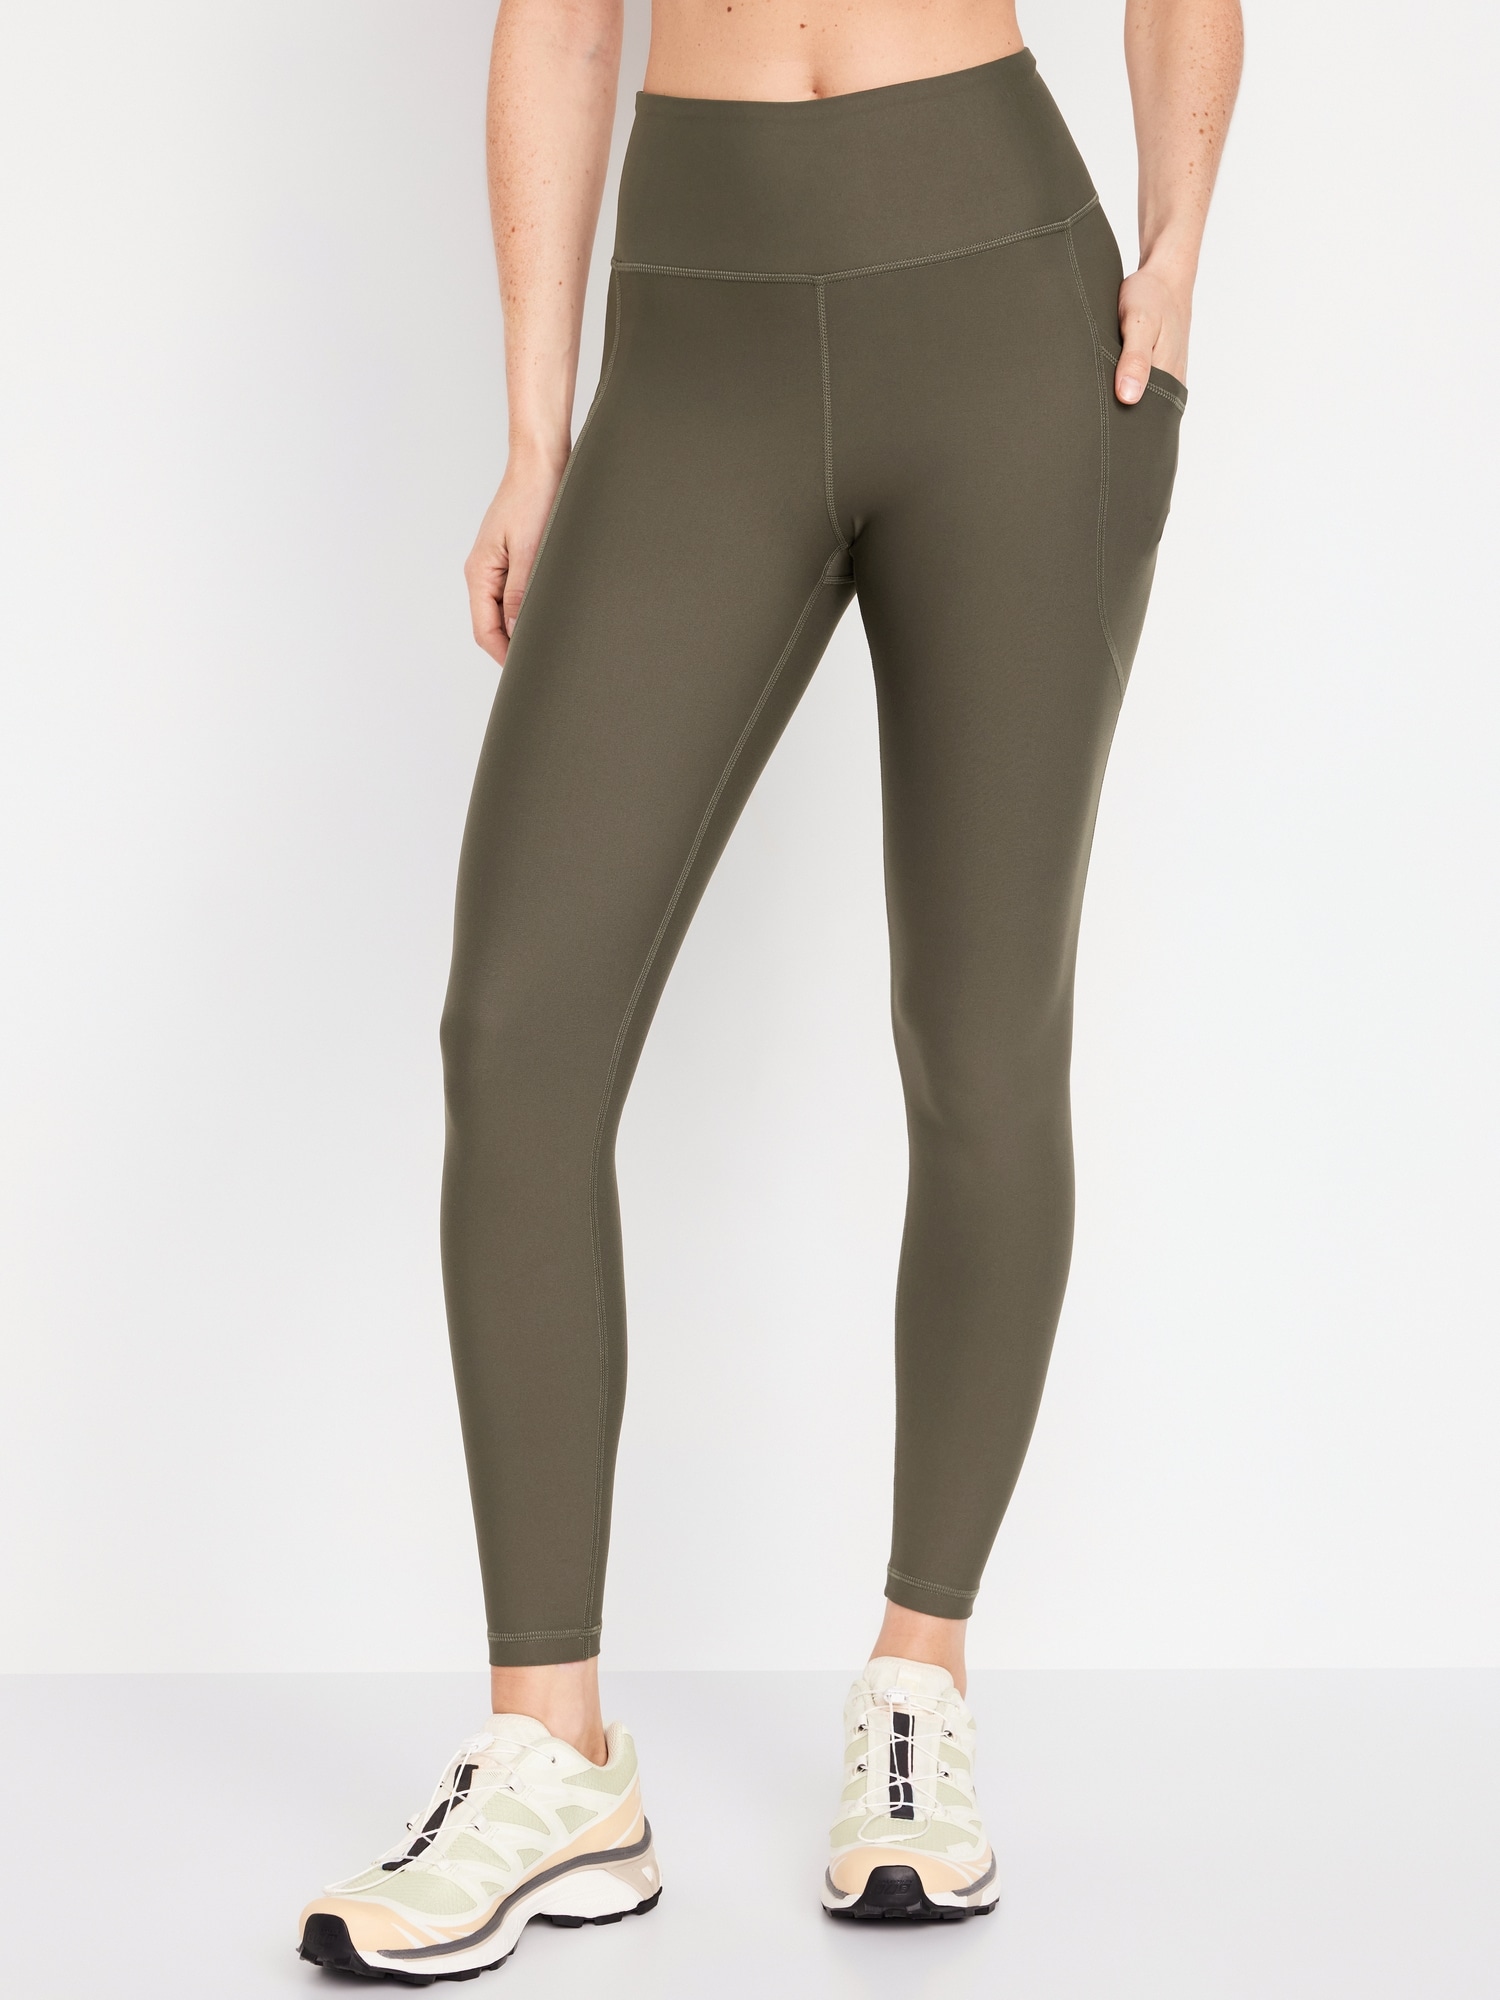  Lululemon Align Full Length Yoga Pants - High-Waisted Design,  28 Inch Inseam (Incognito Camo Multi Grey, 0) : Clothing, Shoes & Jewelry